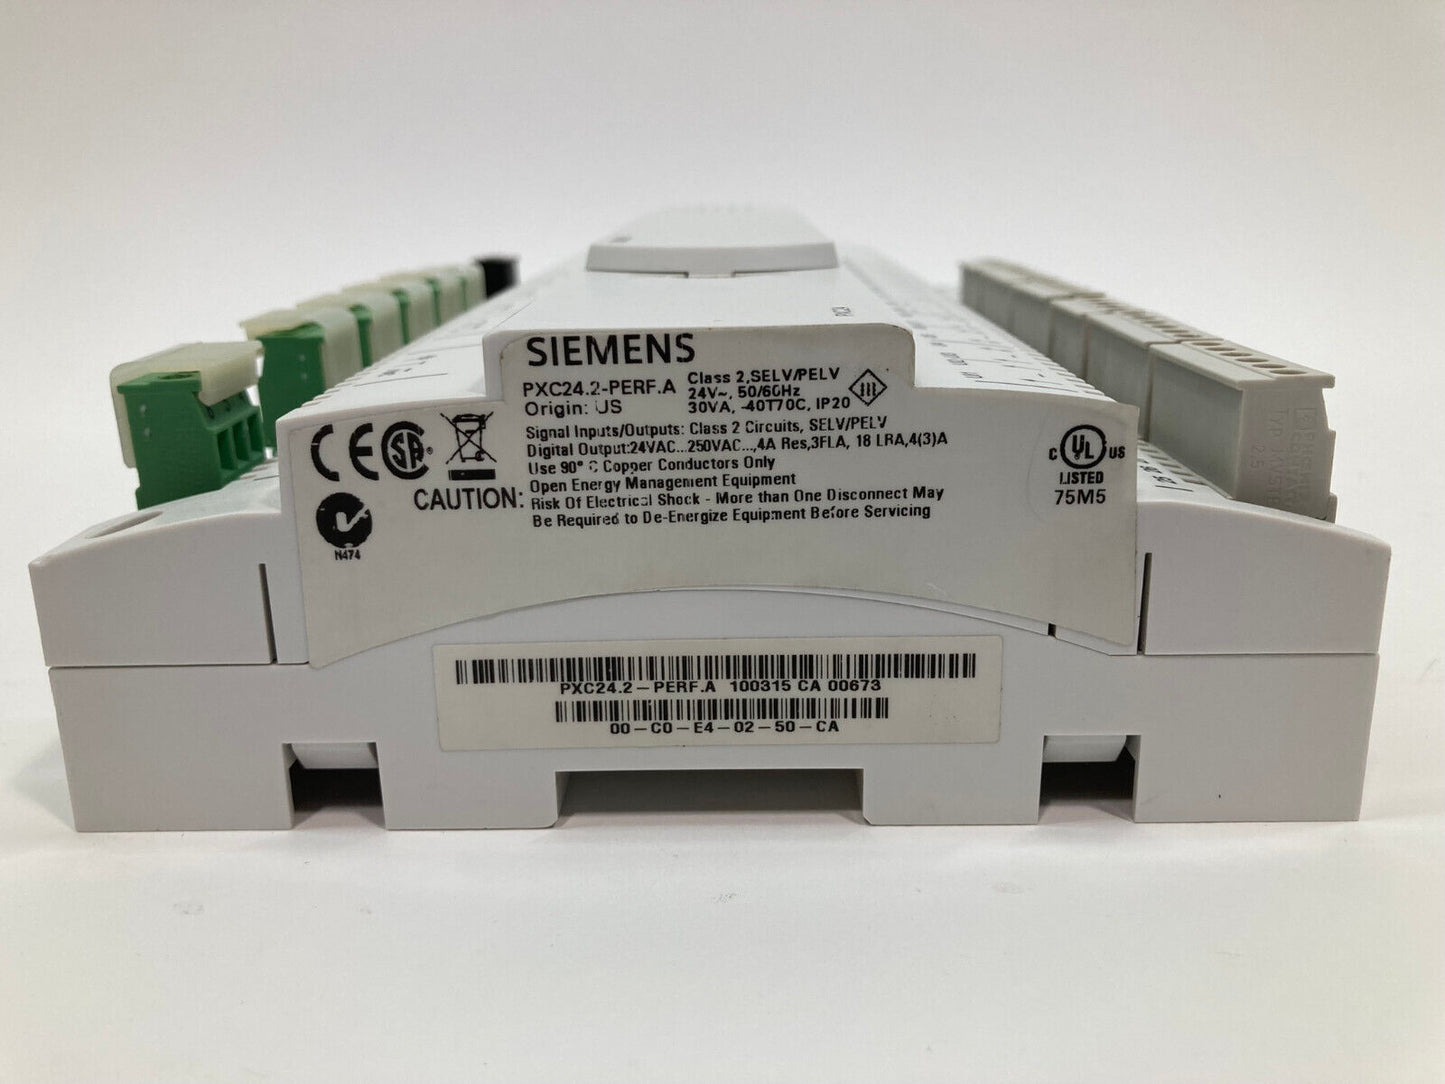 Siemens PXC24.2-PERF.A PXC24 APOGEE 24PT P2 Ethernet Rooftop Controller